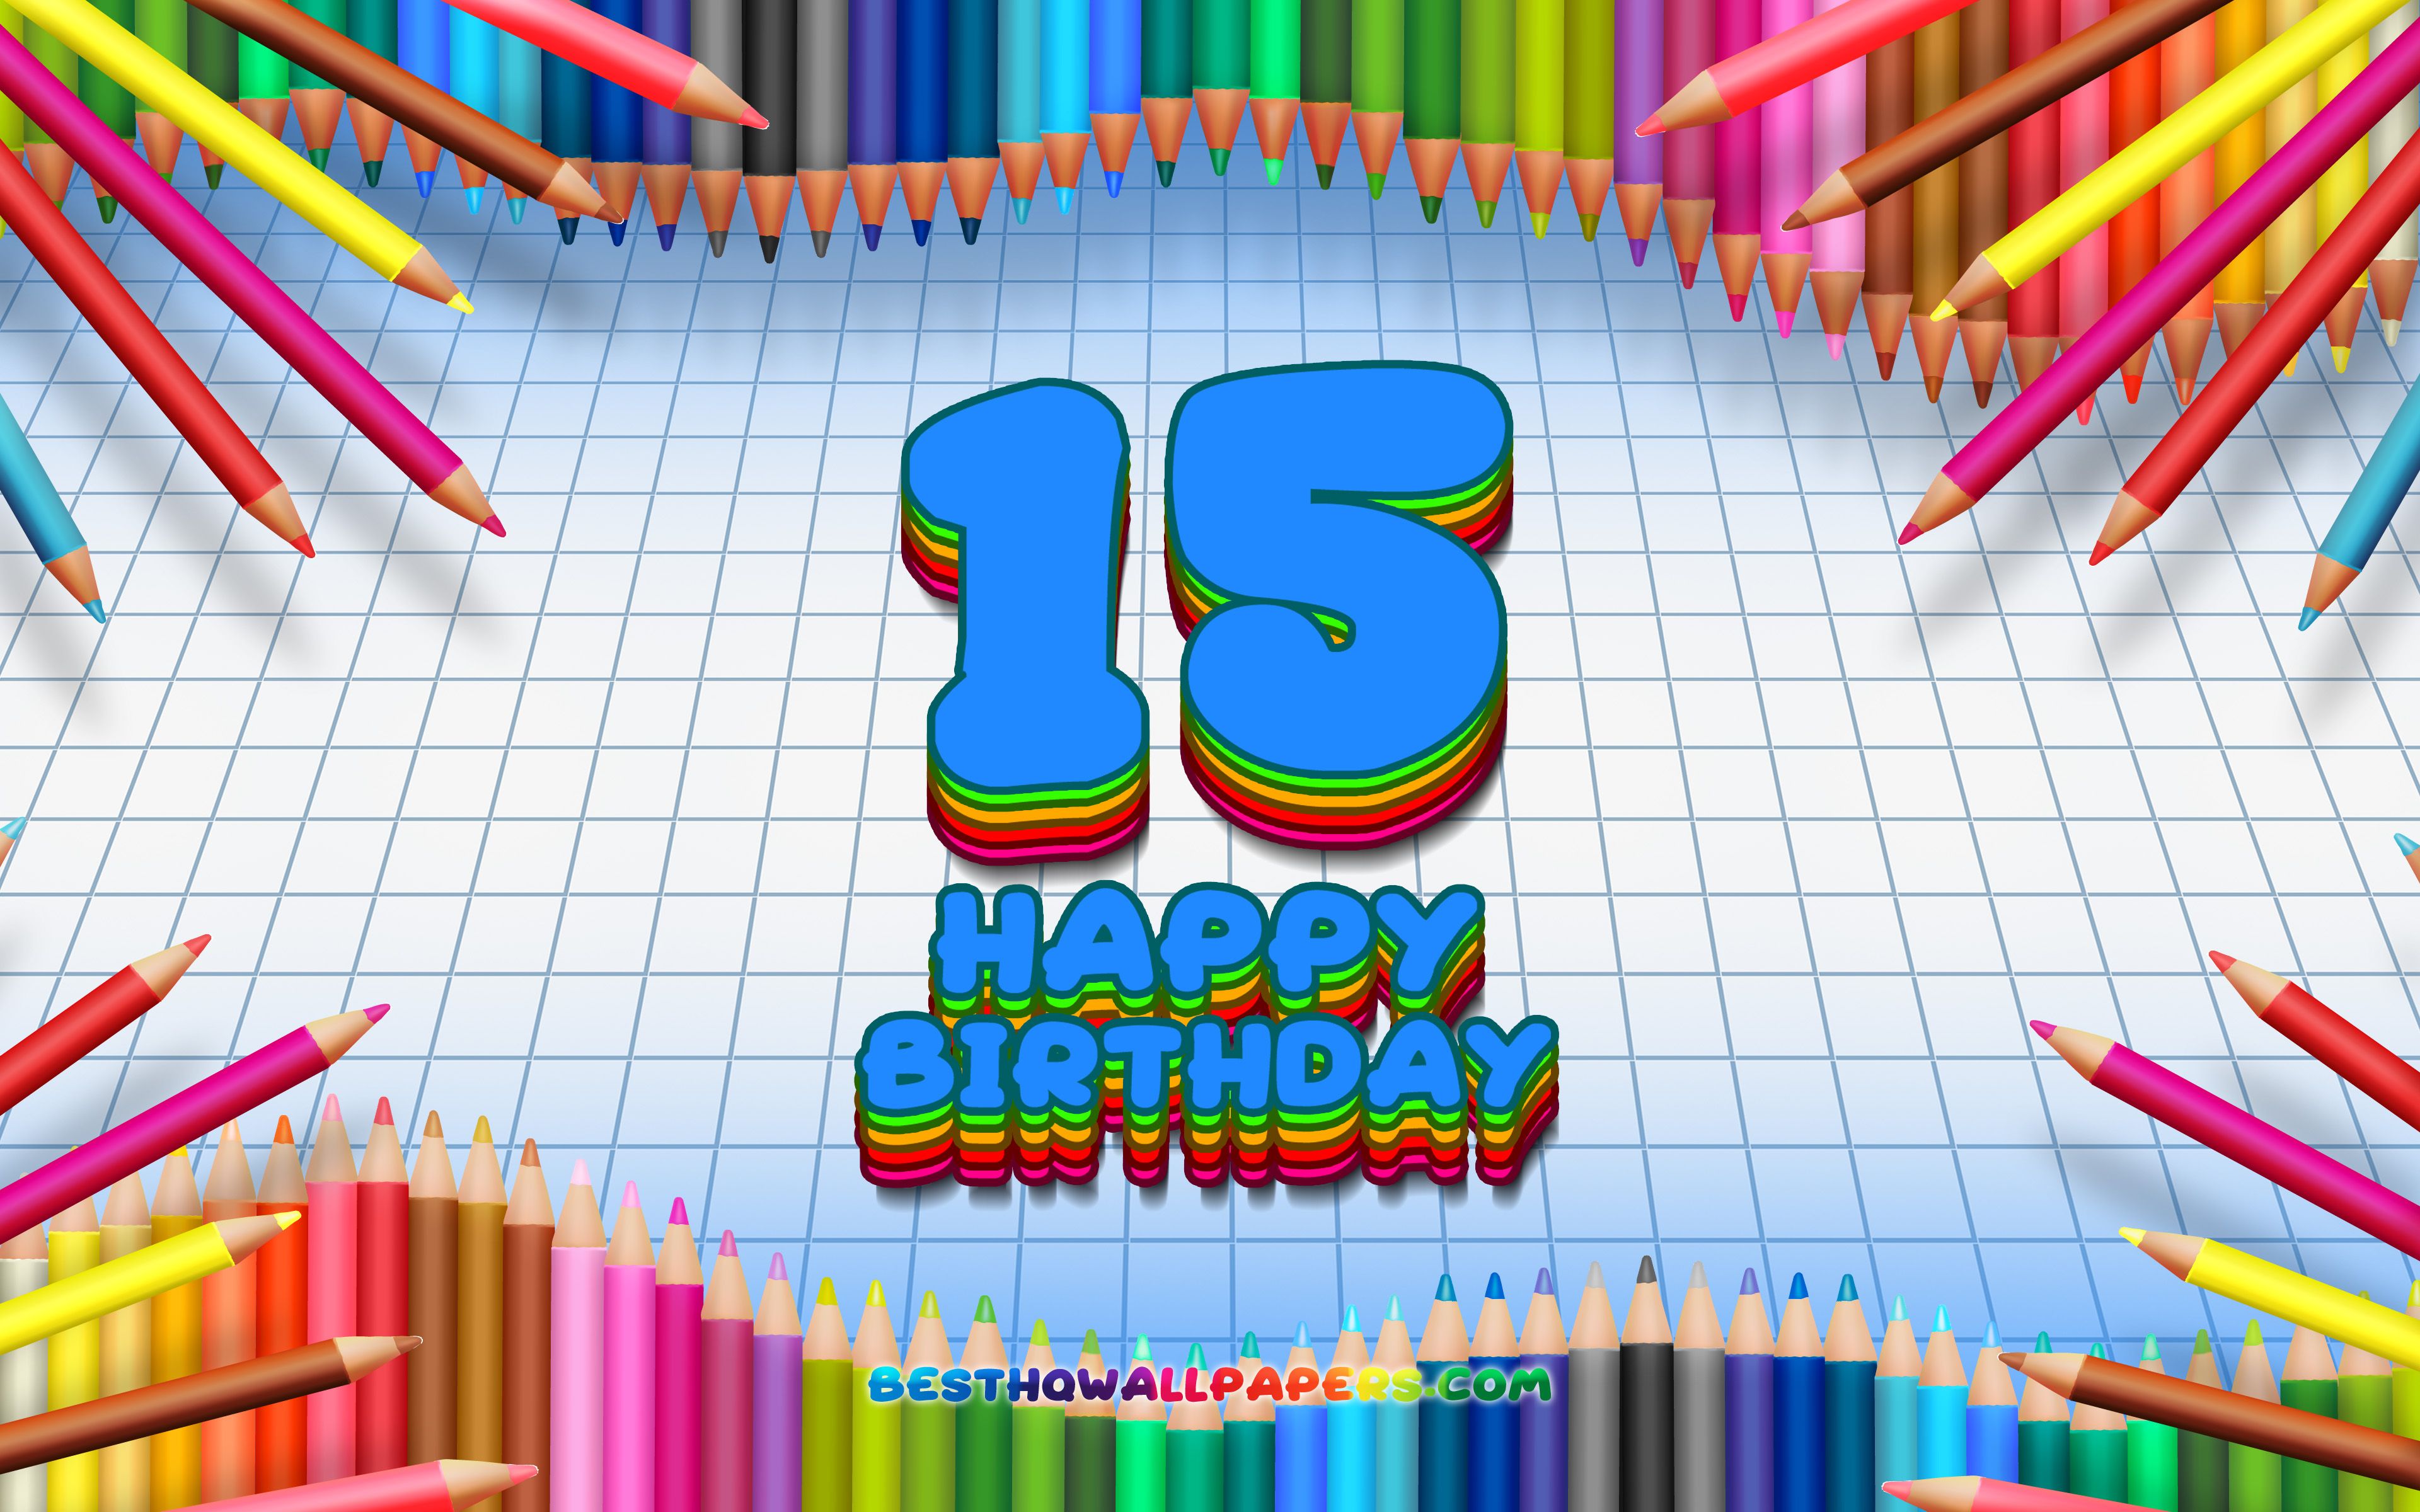 Download wallpaper 4k, Happy 15th birthday, colorful pencils frame, Birthday Party, blue checkered background, Happy 15 Years Birthday, creative, 15th Birthday, Birthday concept, 15th Birthday Party for desktop with resolution 3840x2400. High